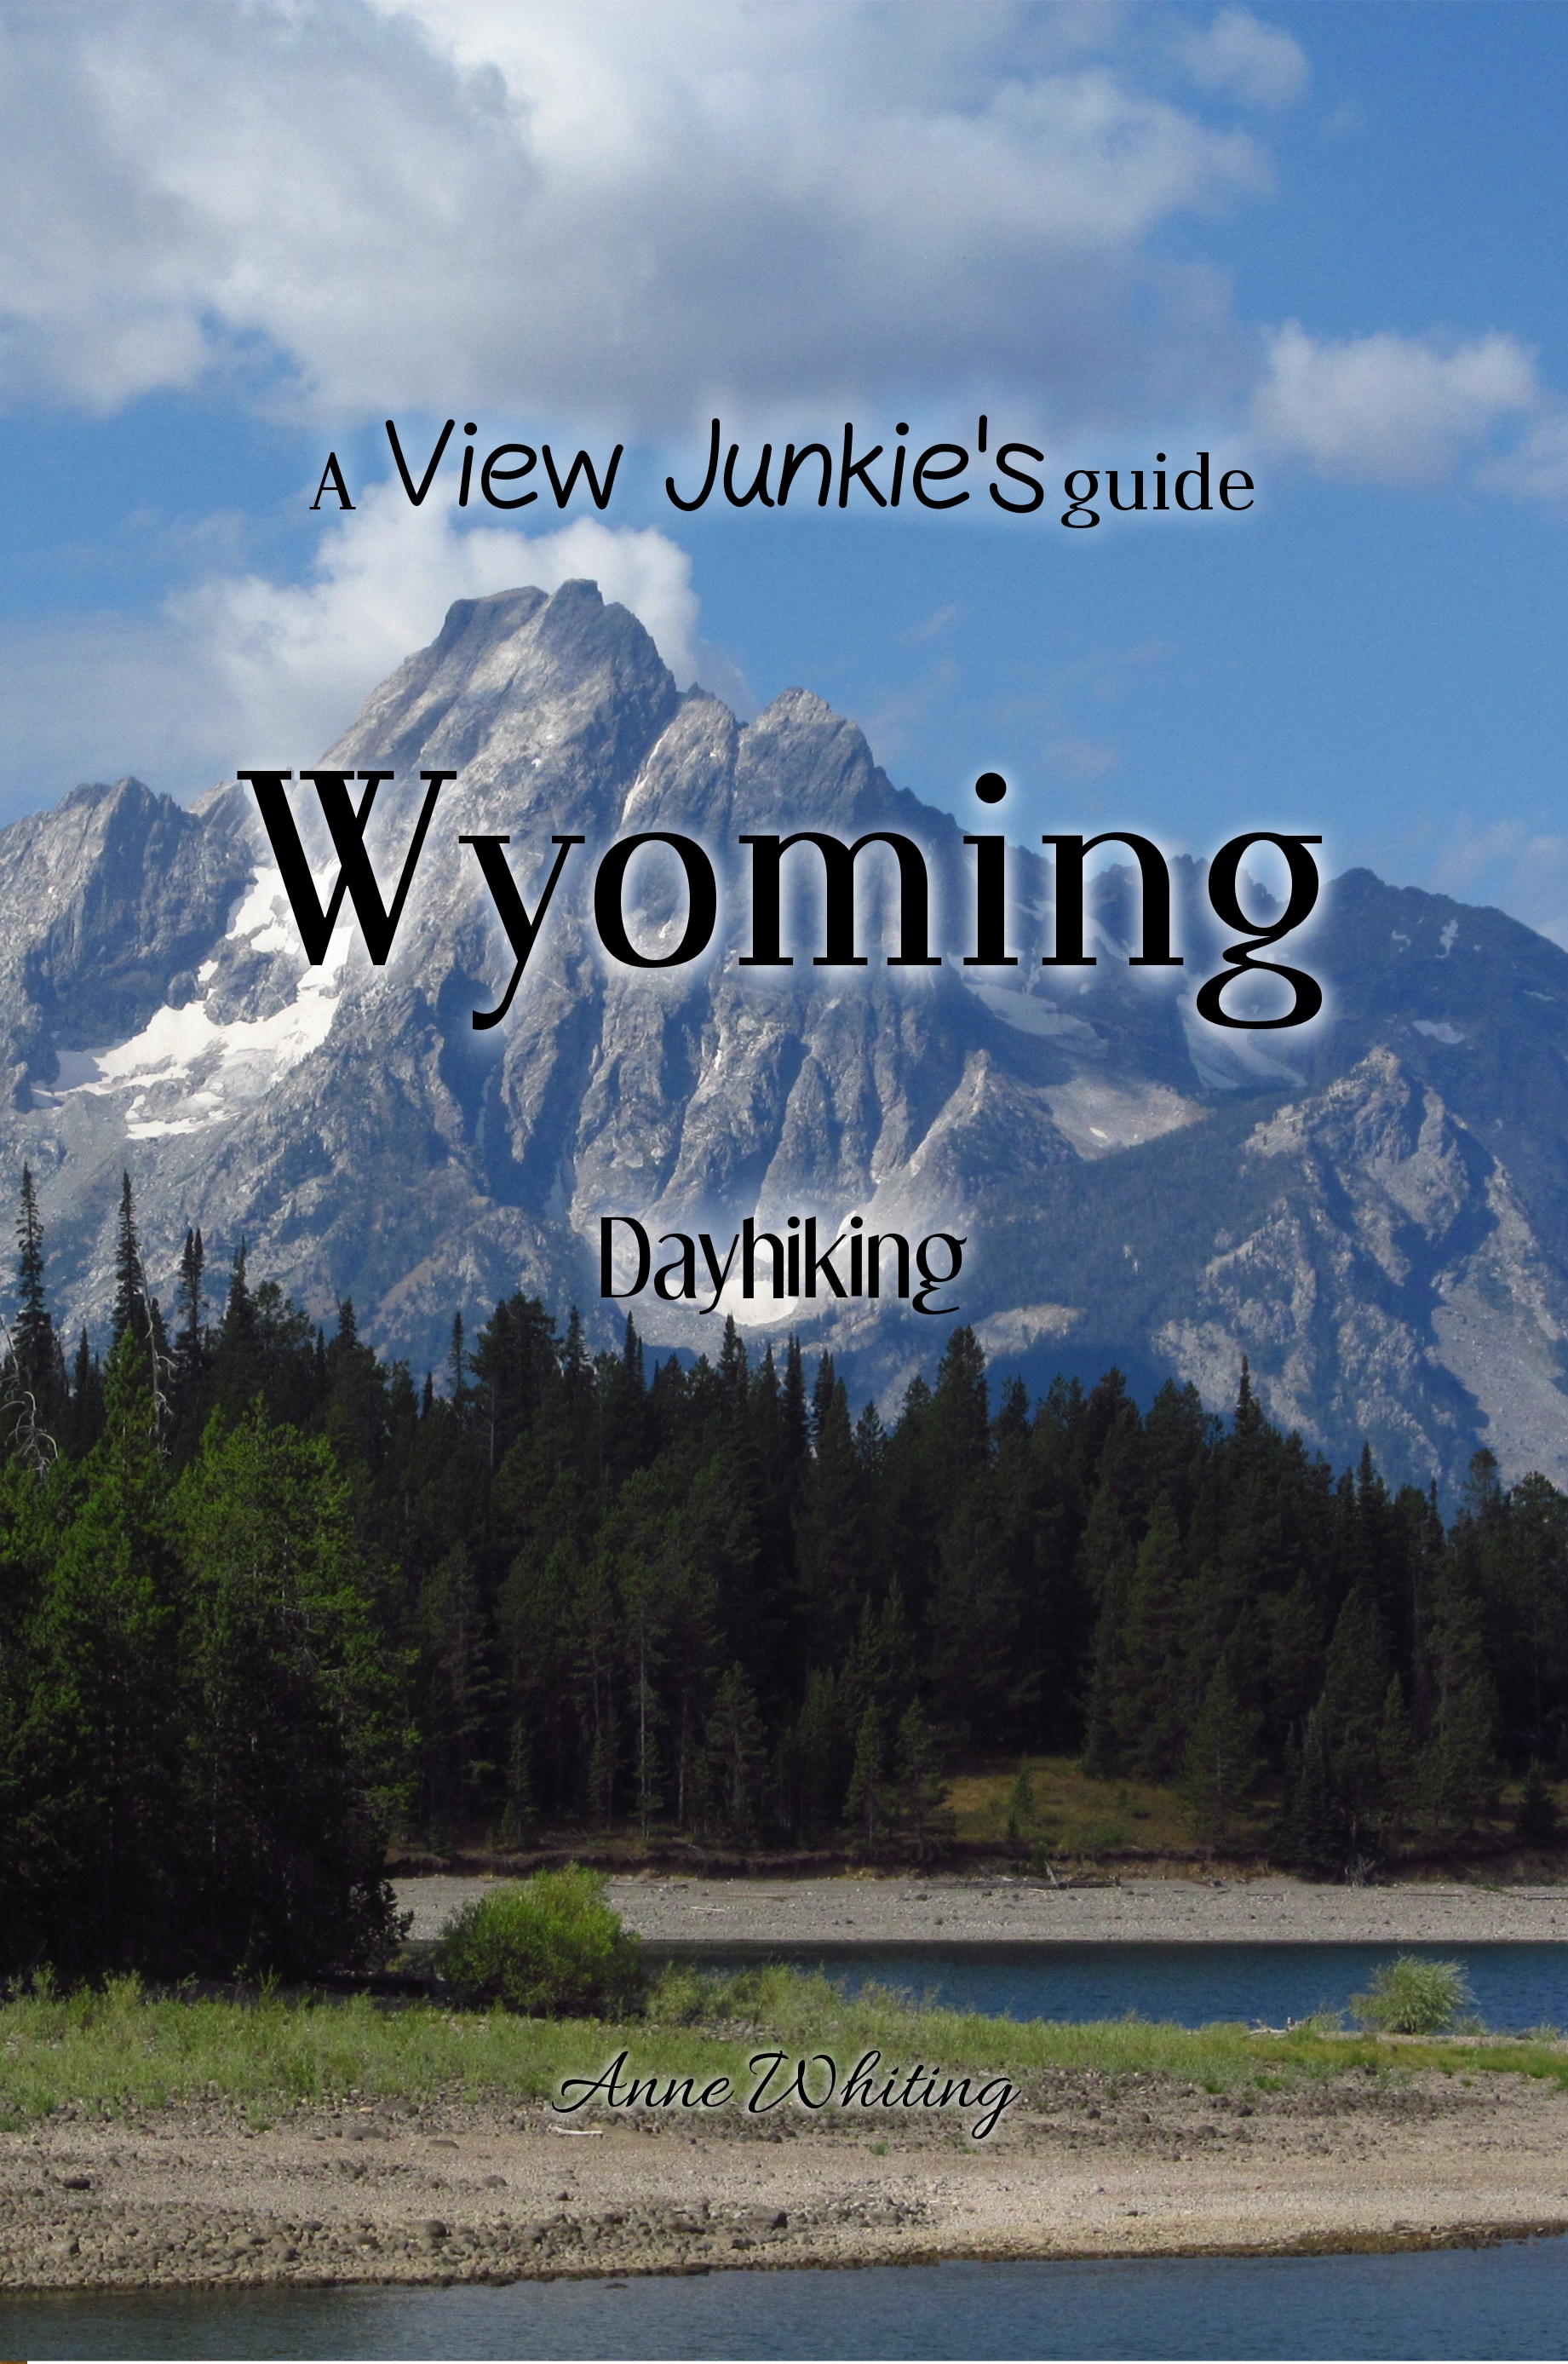 Book cover of "A View Junkie Guide to Wyoming Dayhiking" by Anne Whiting